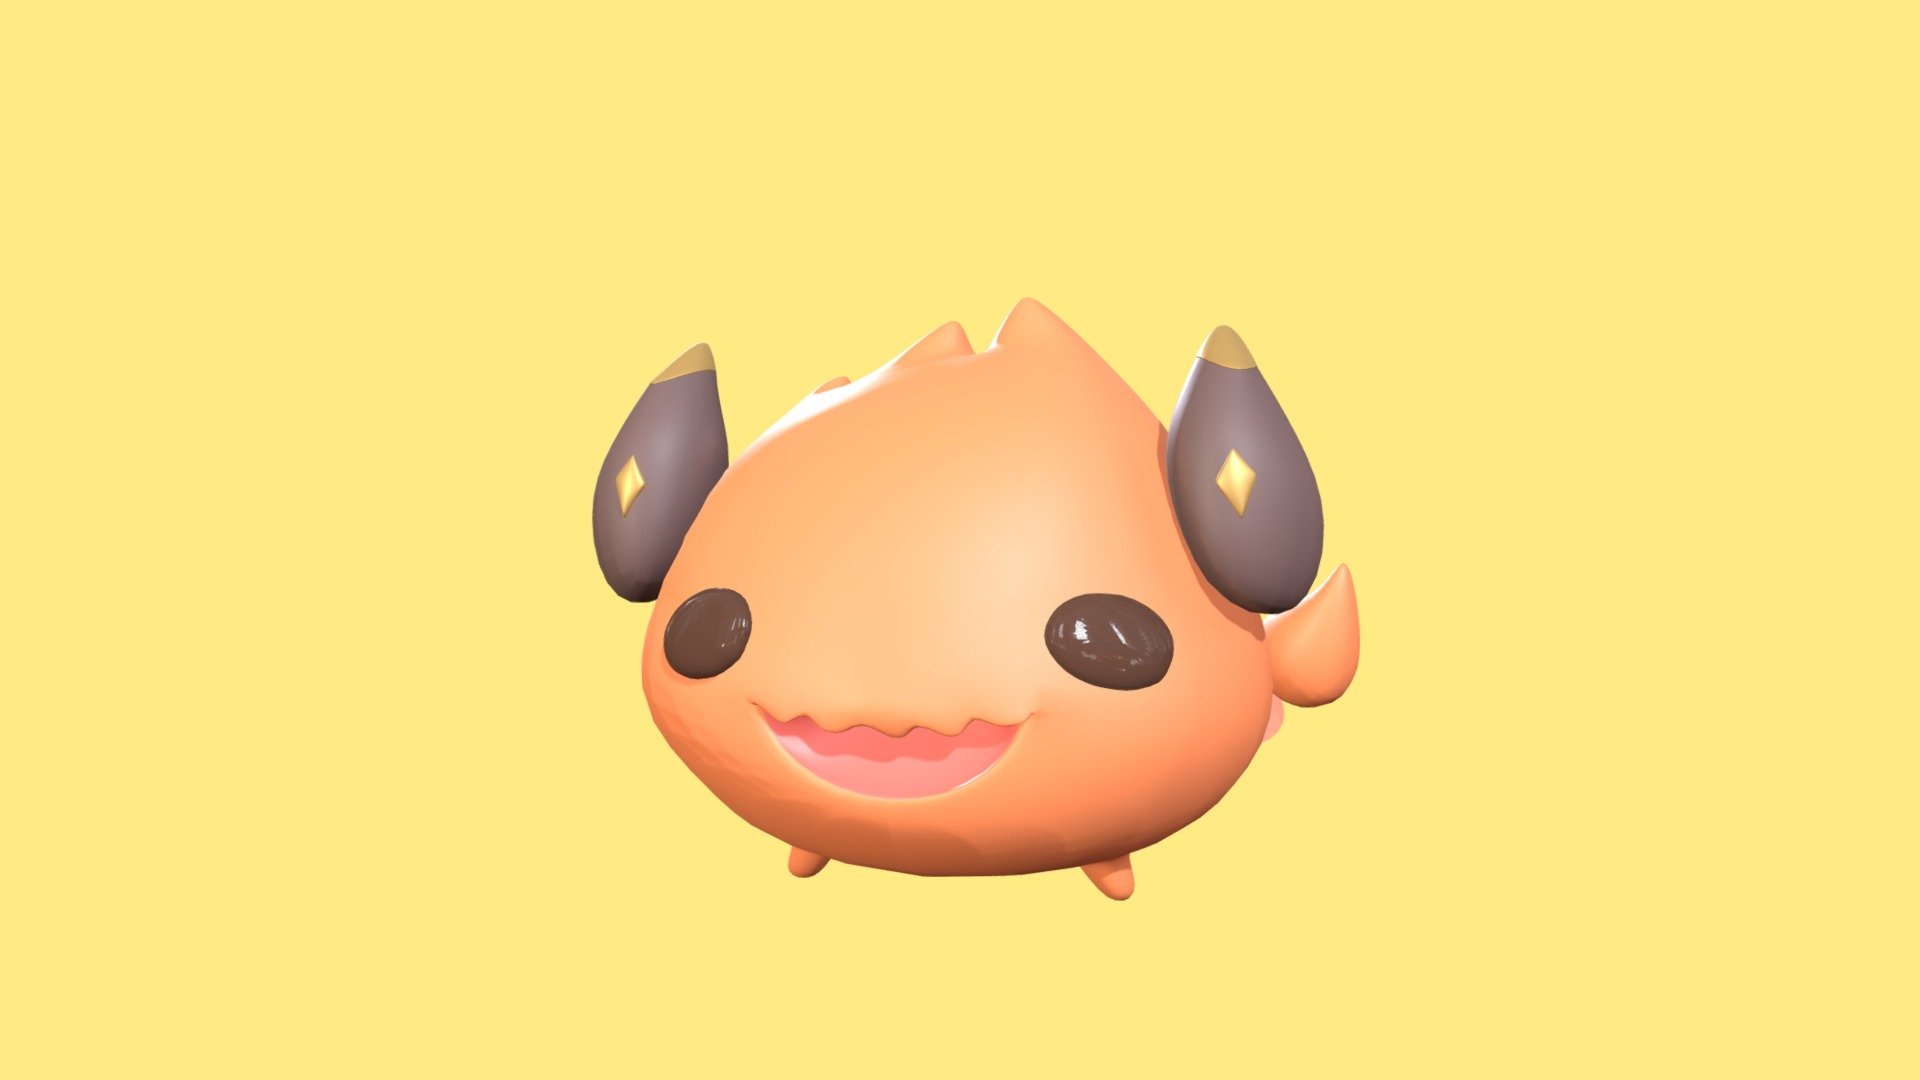 It's a cute lobster I guess                               

Asa_Ifrit's Channel: https://www.twitch.tv/asa_ifrit - Asa Lobster - Download Free 3D model by BunnyGame 3d model